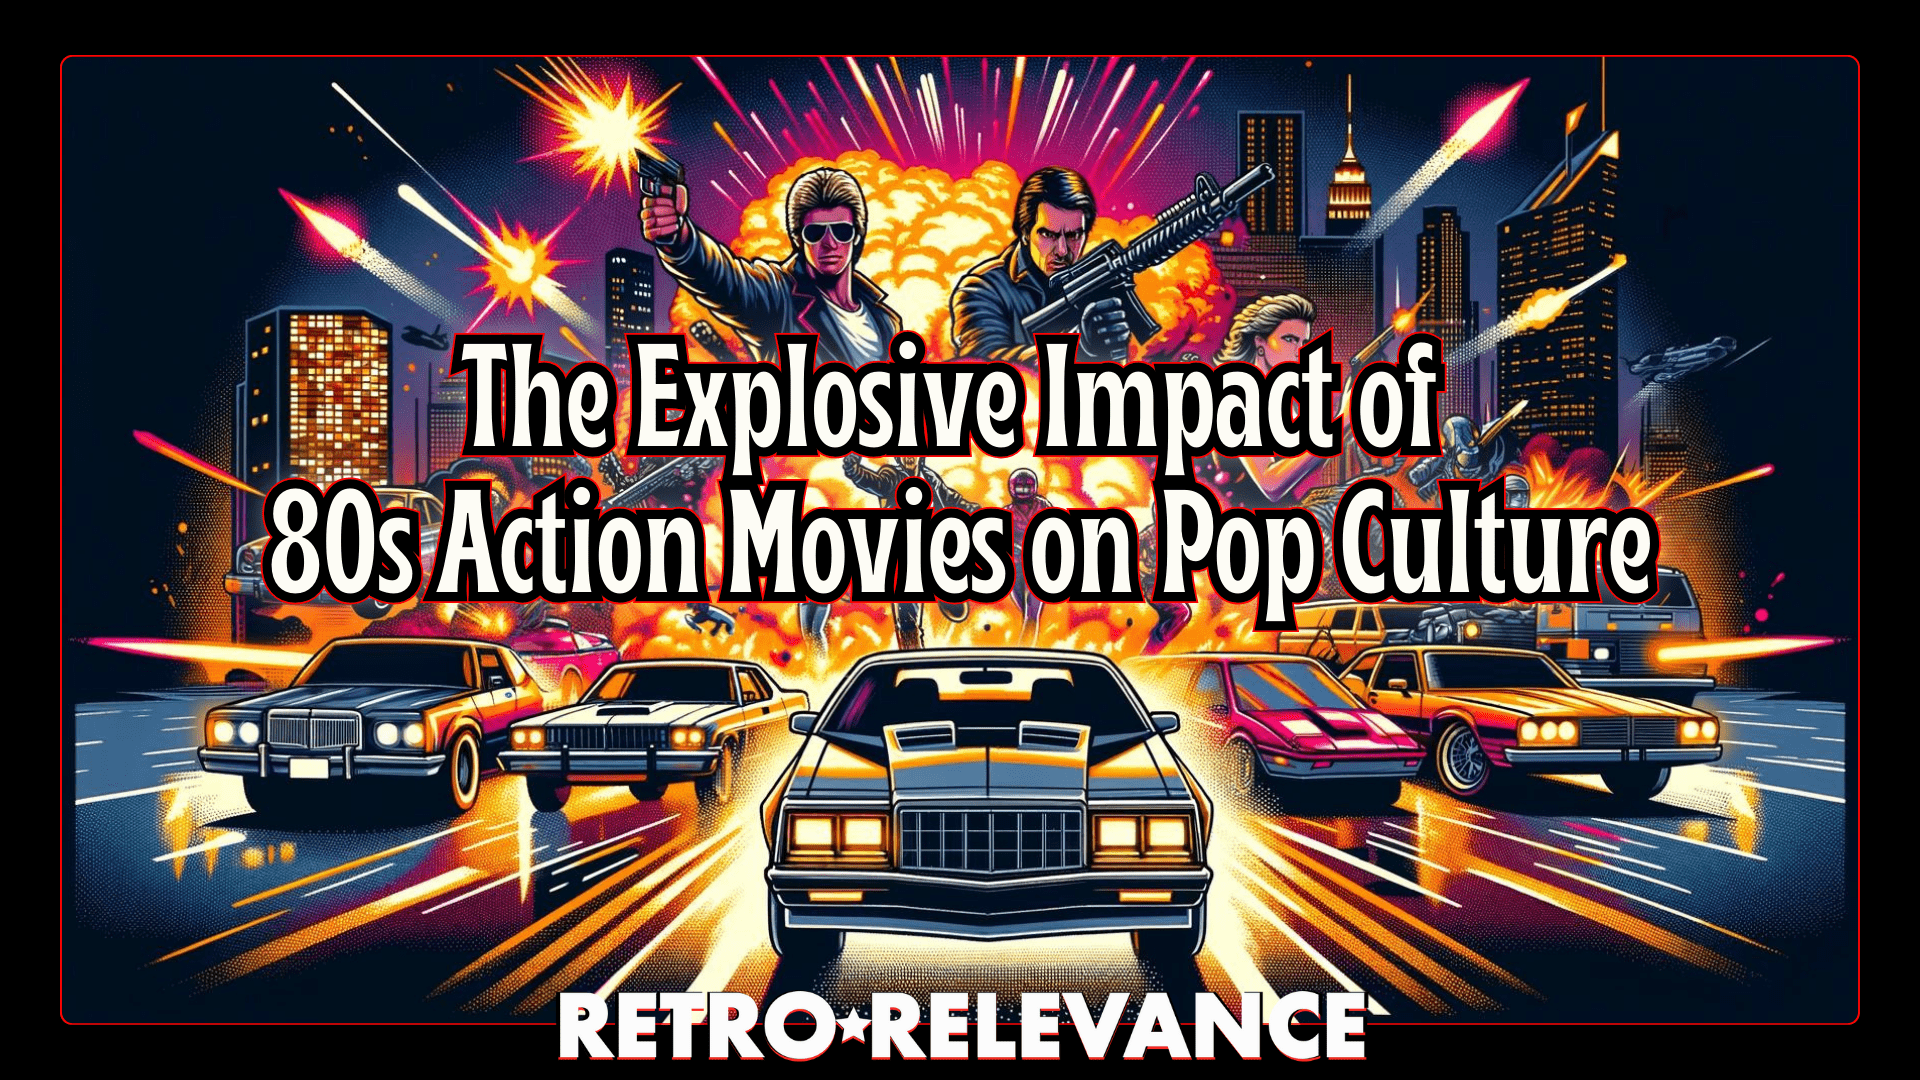 The Explosive Impact of 80s Action Movies on Pop Culture